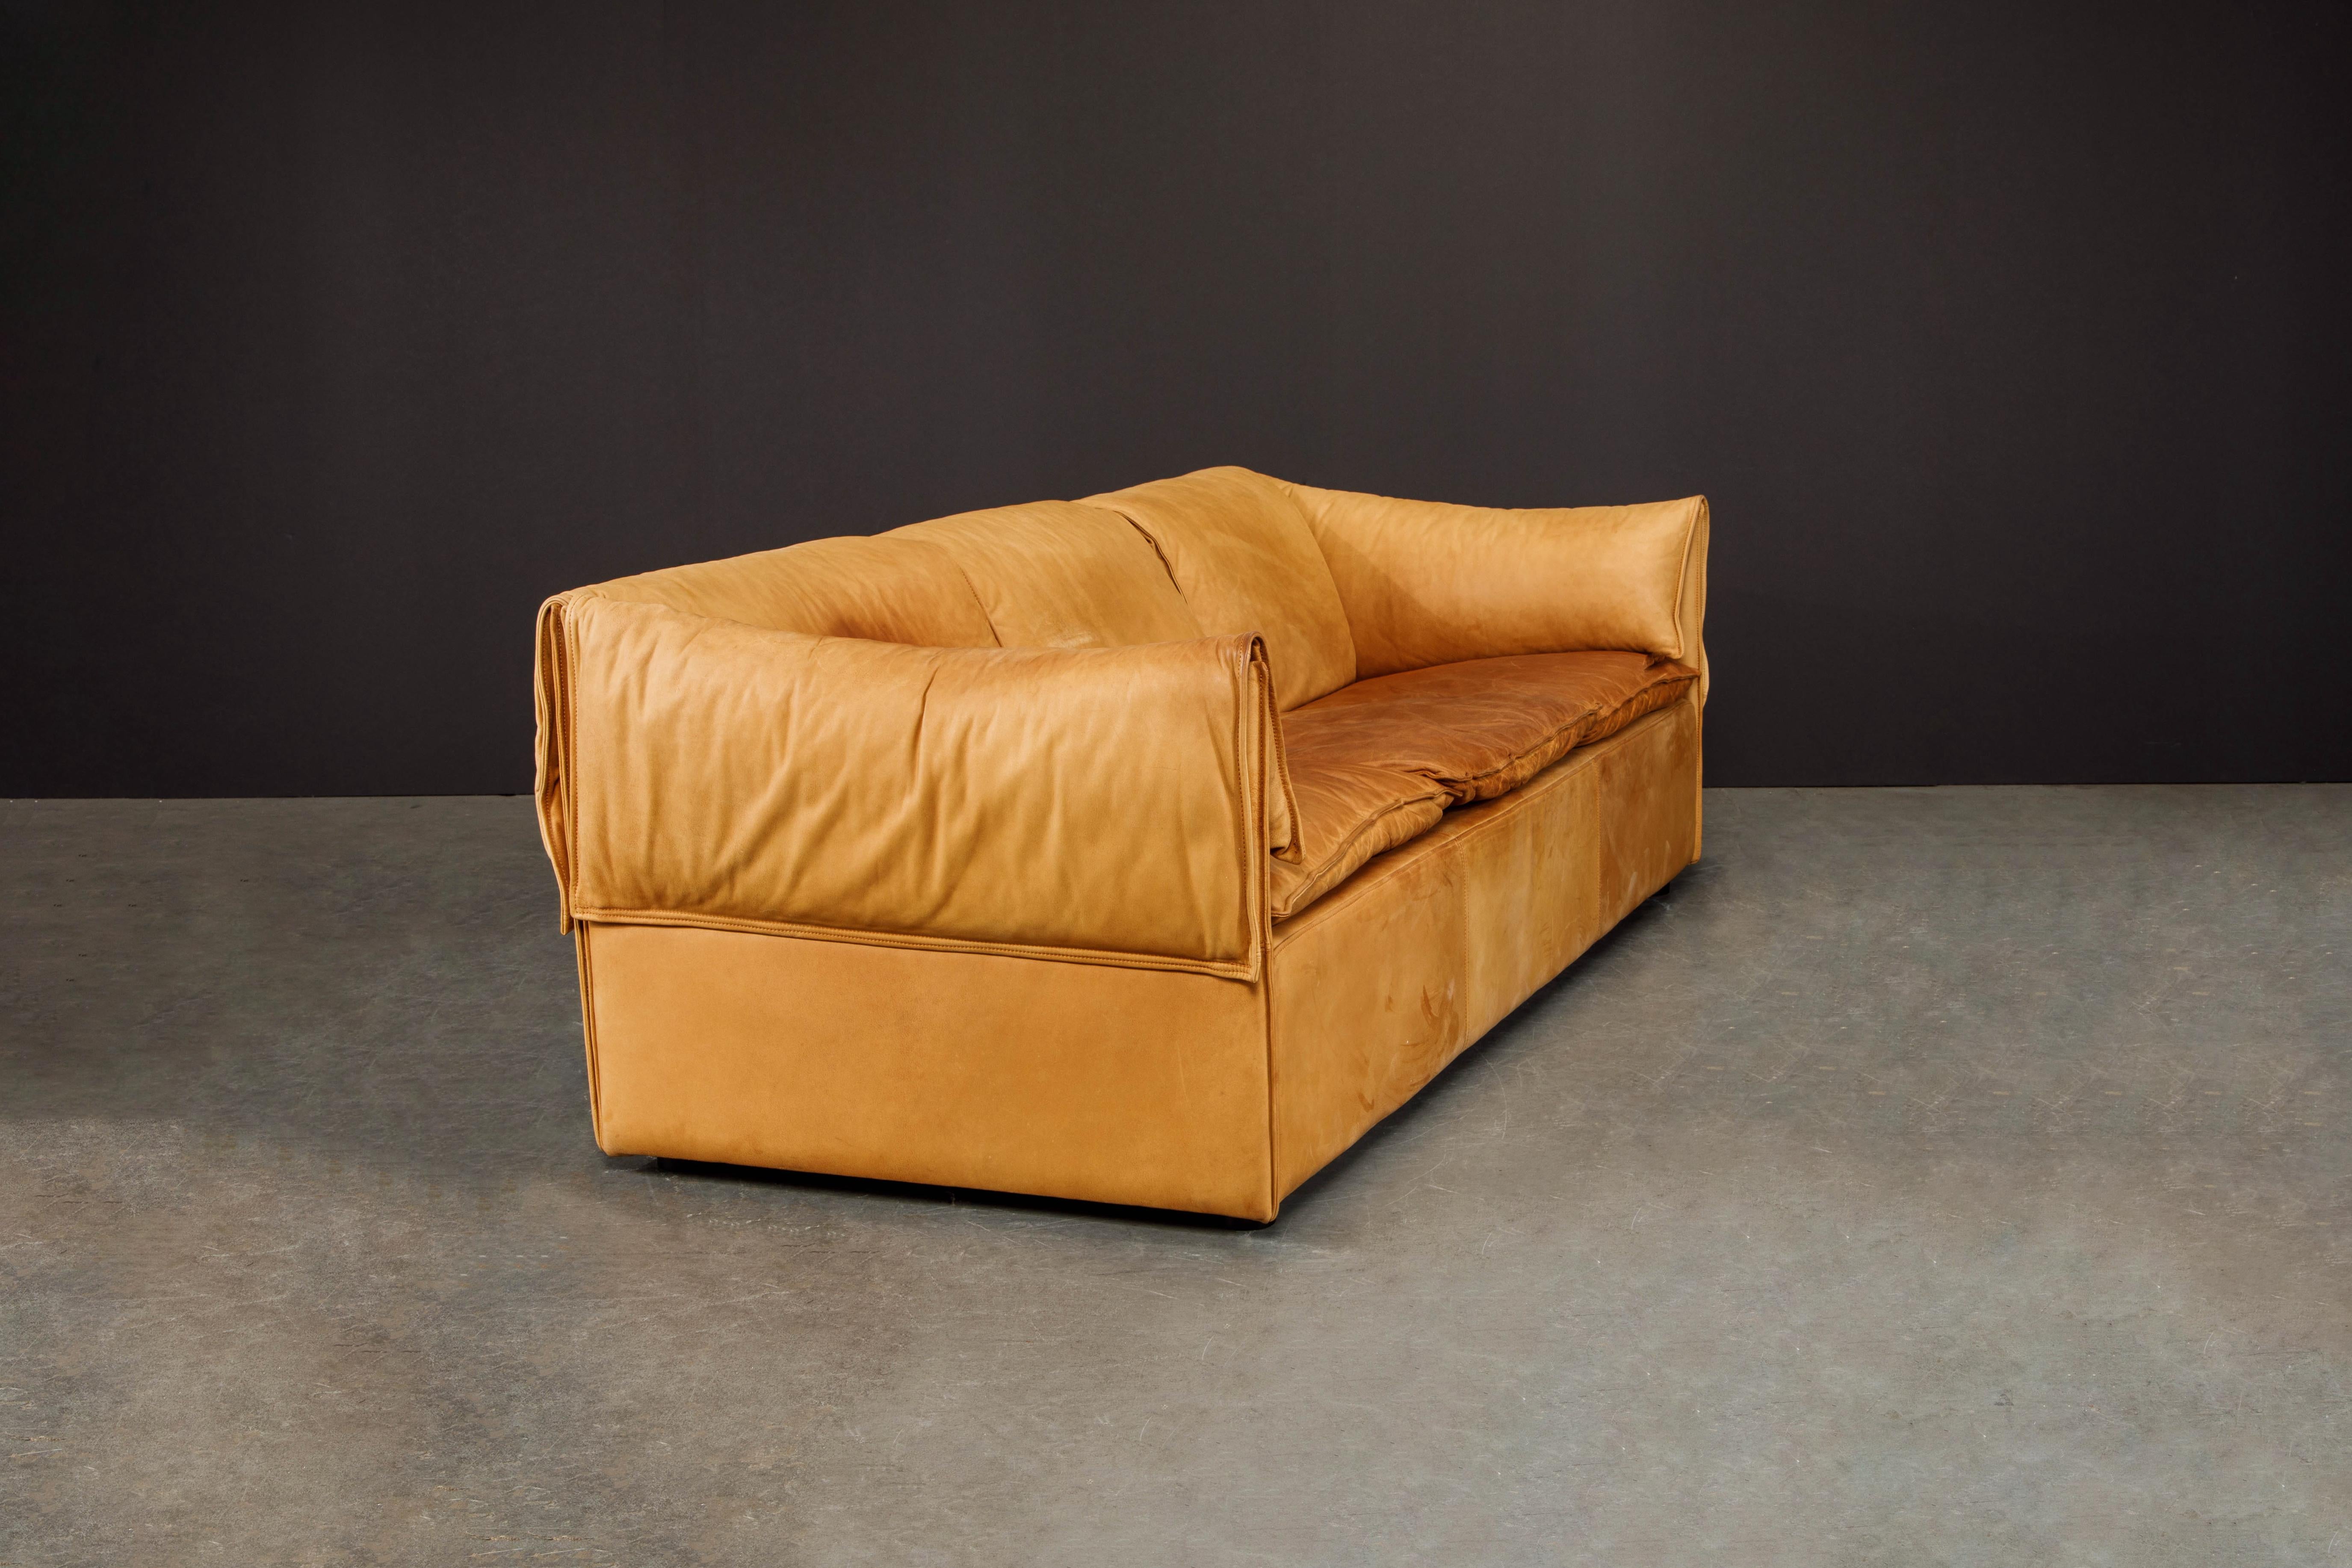 do bed bugs get in leather furniture